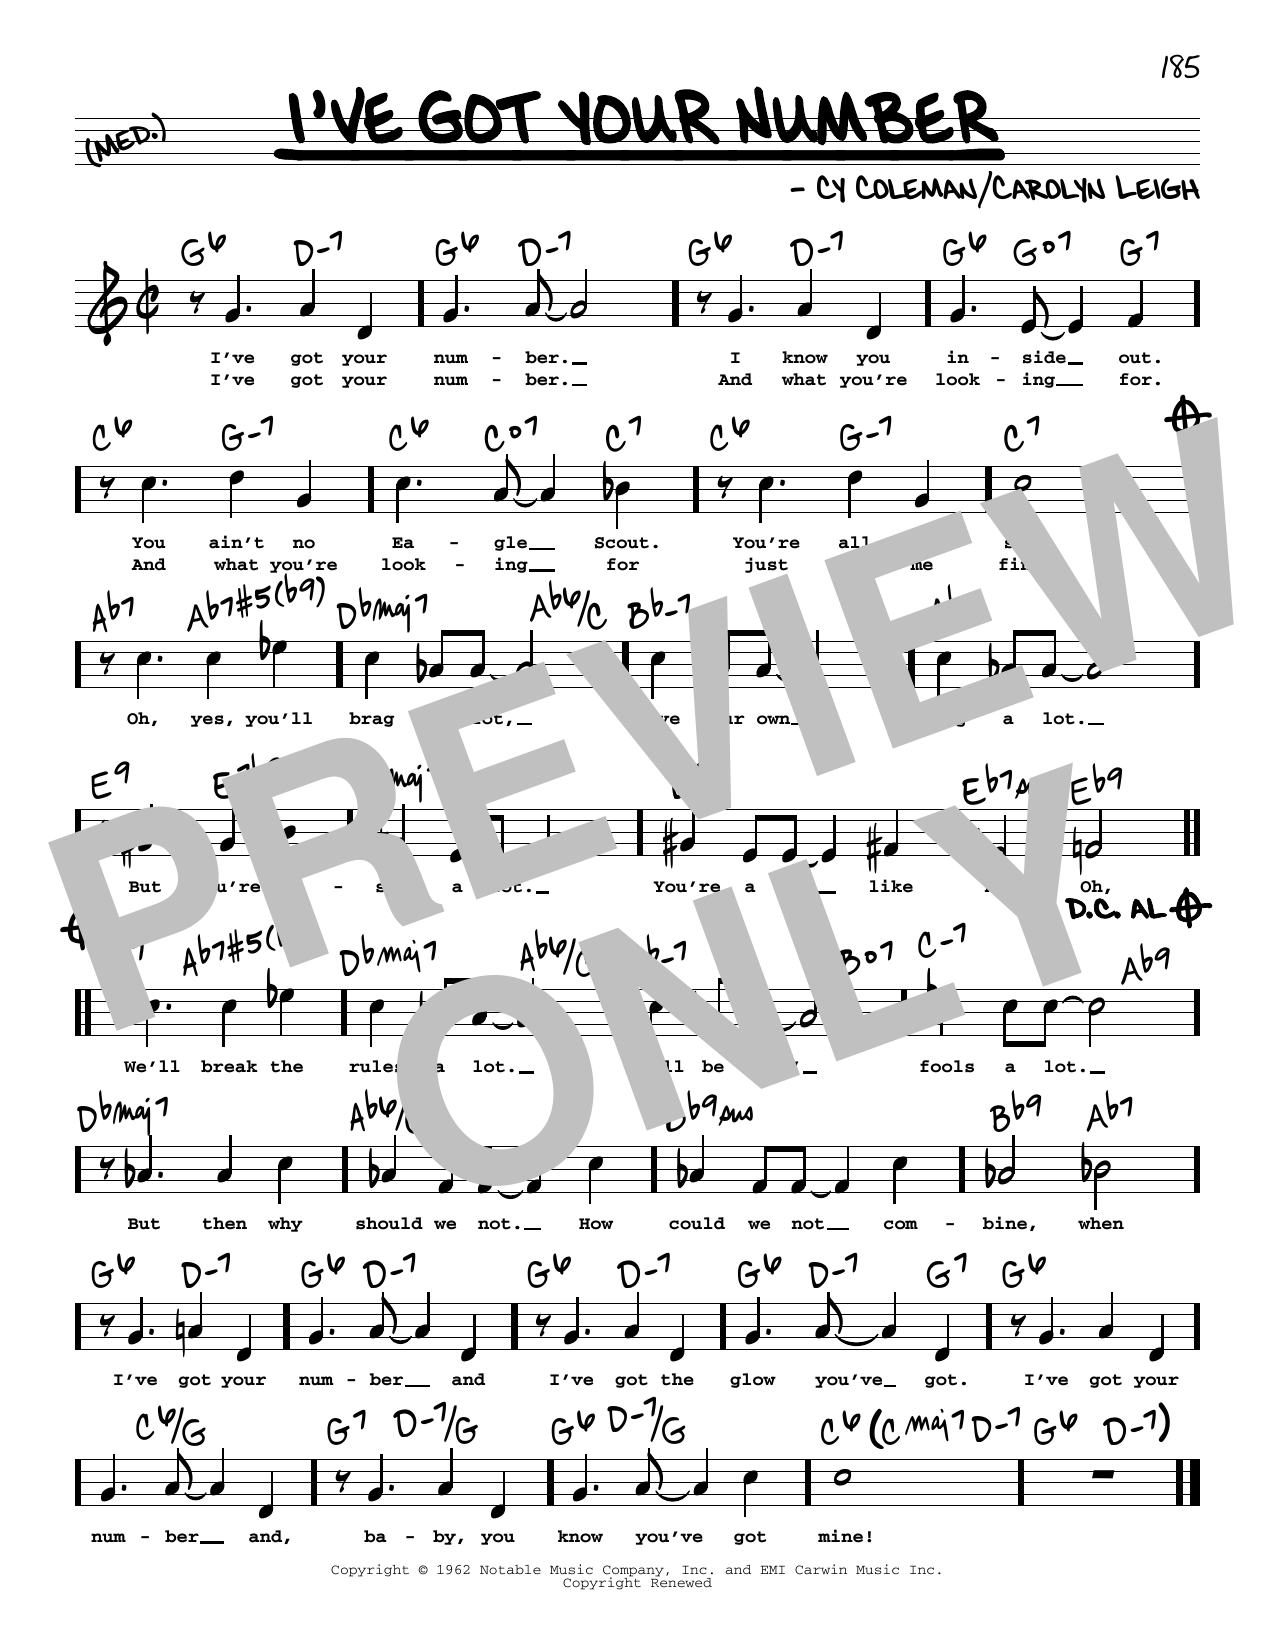 Download Cy Coleman and Carolyn Leigh I've Got Your Number (High Voice) (from Sheet Music